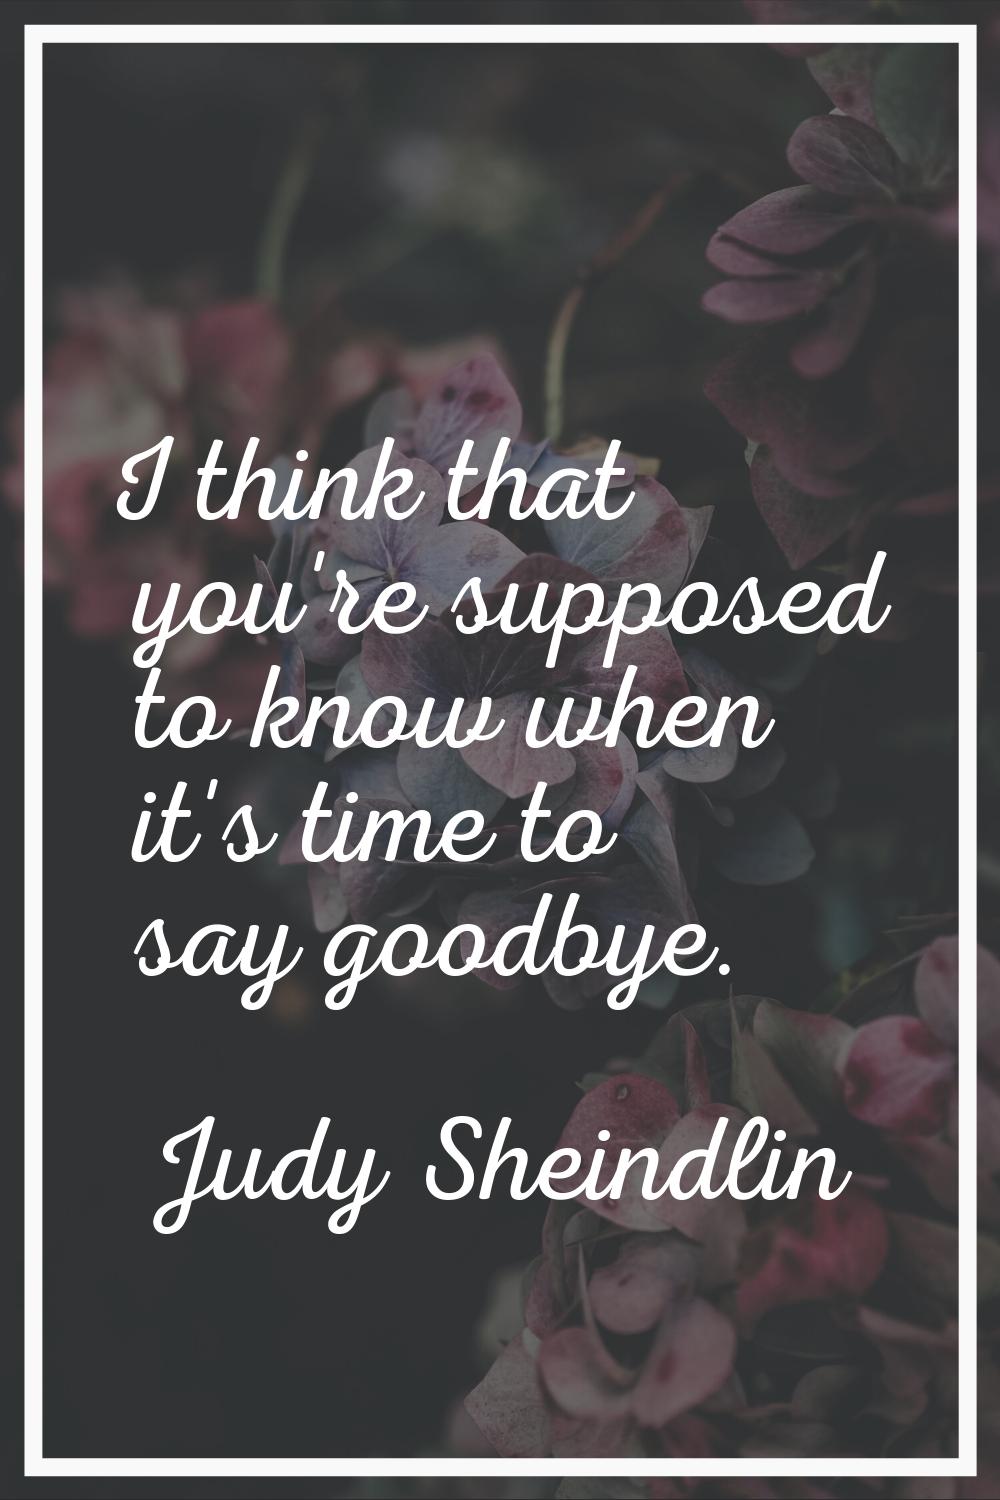 I think that you're supposed to know when it's time to say goodbye.